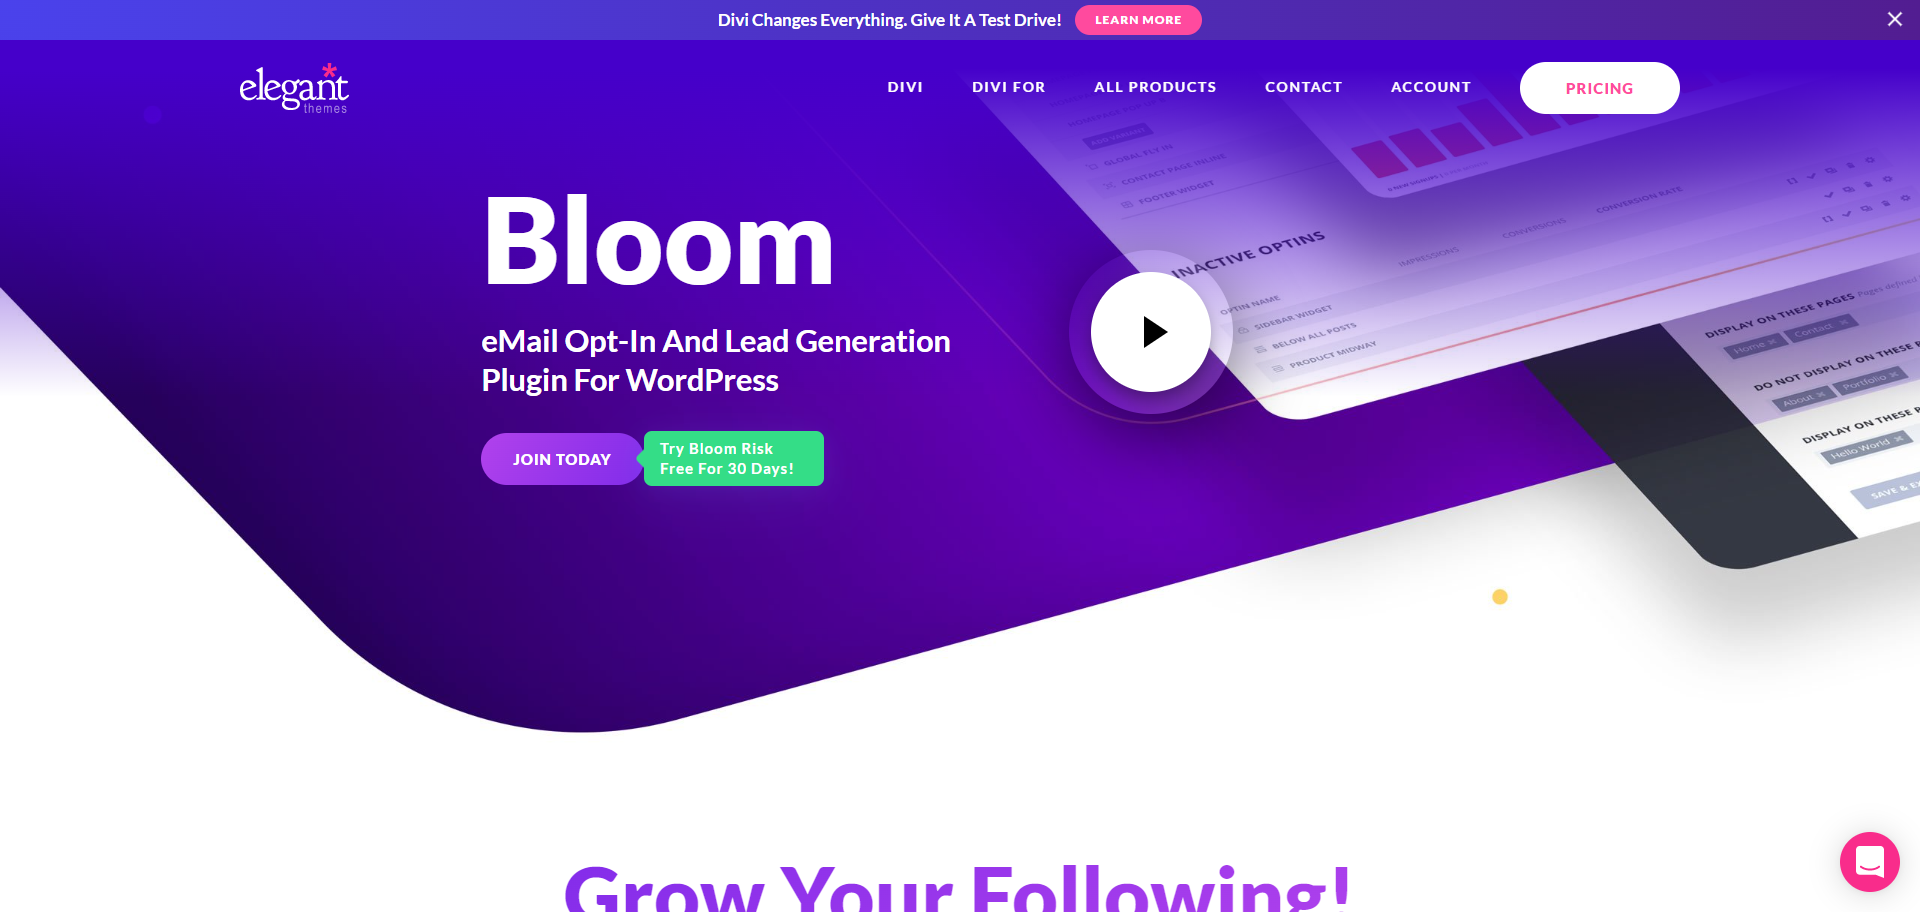 Bloom eMail Opt-In And Lead Generation Plugin For WordPress